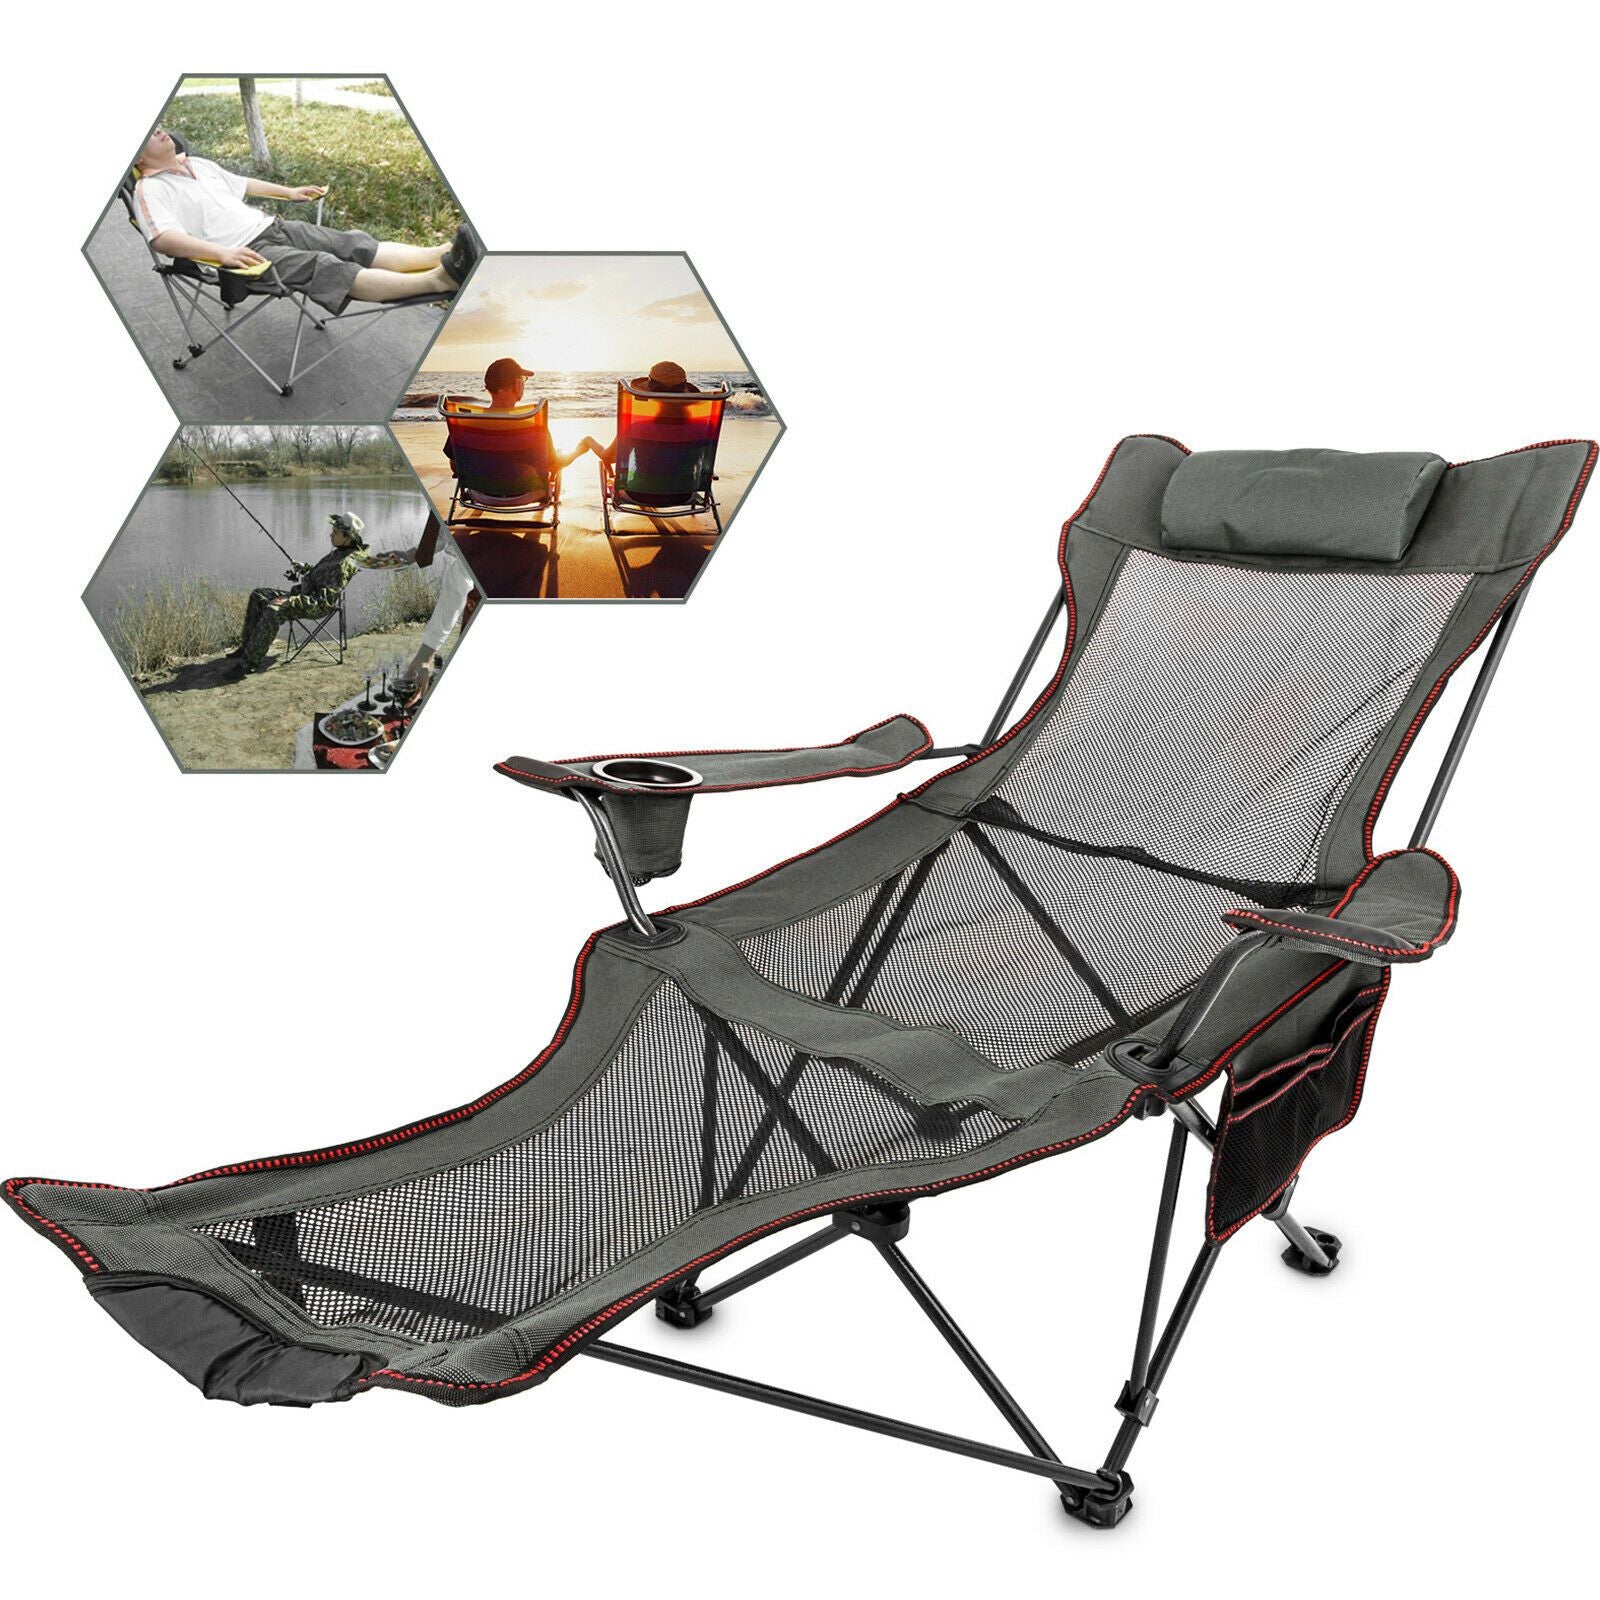 Reclining Folding Camp Fishing Beach Chair with Footrest Portable